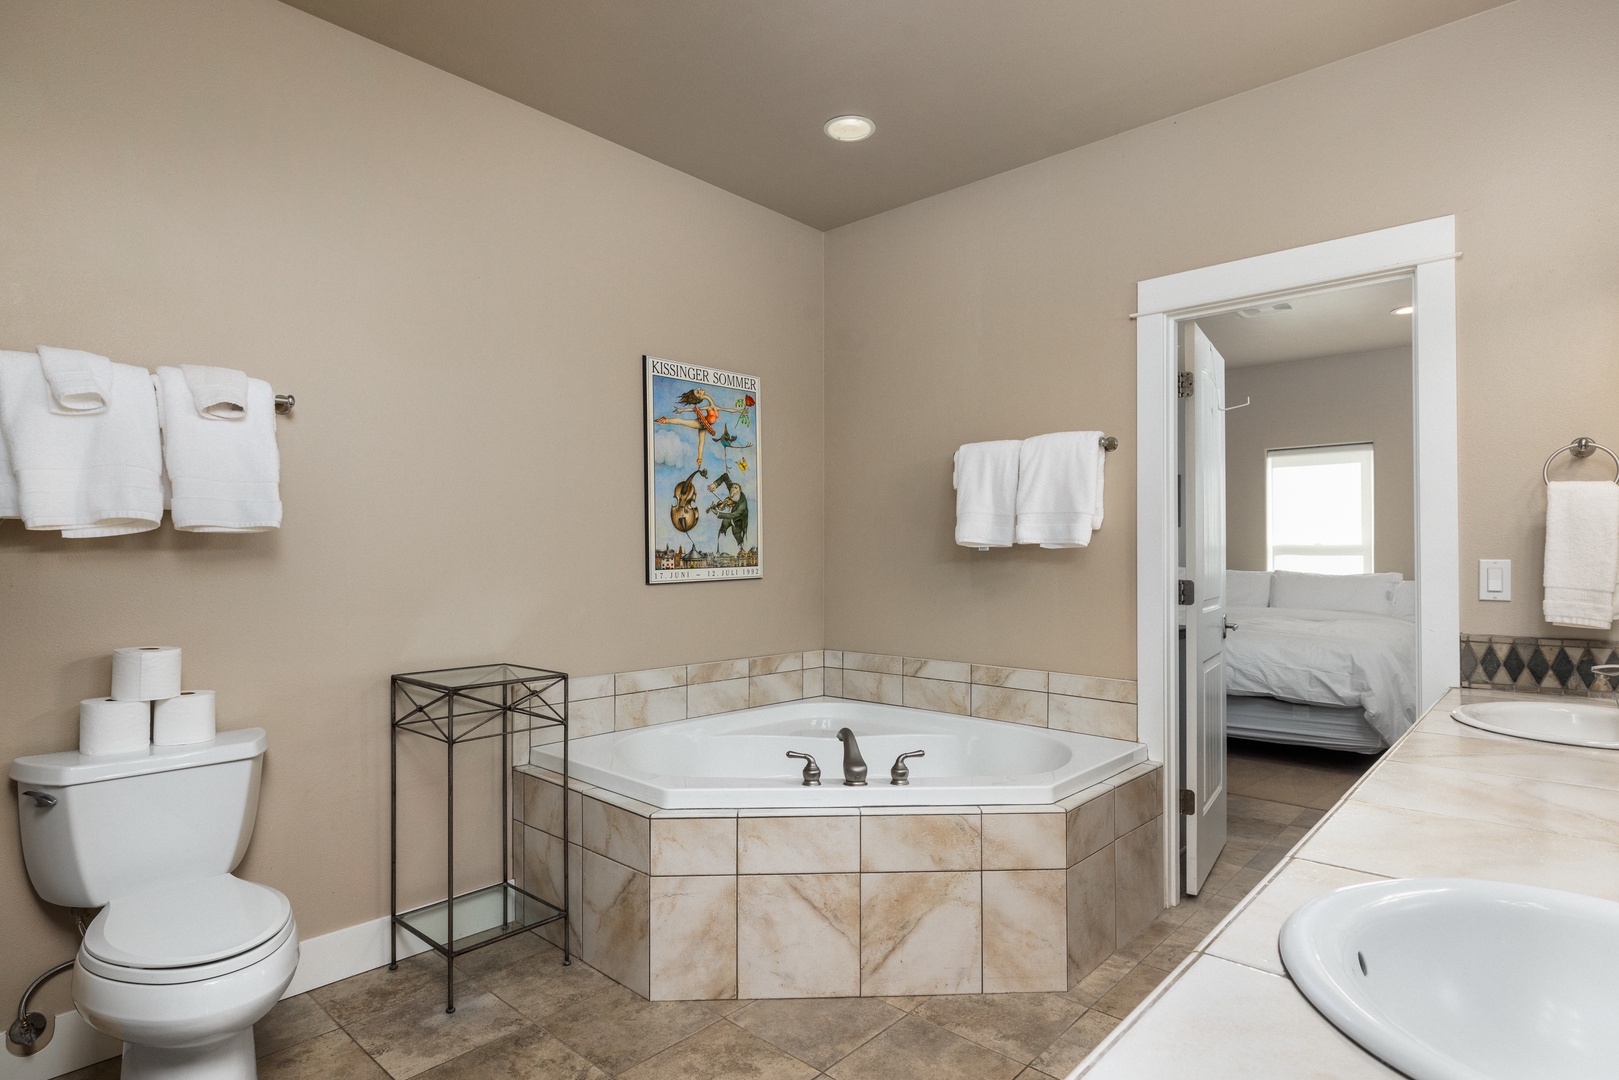 Jack and Jill style ensuite with separate shower, and soaking tub